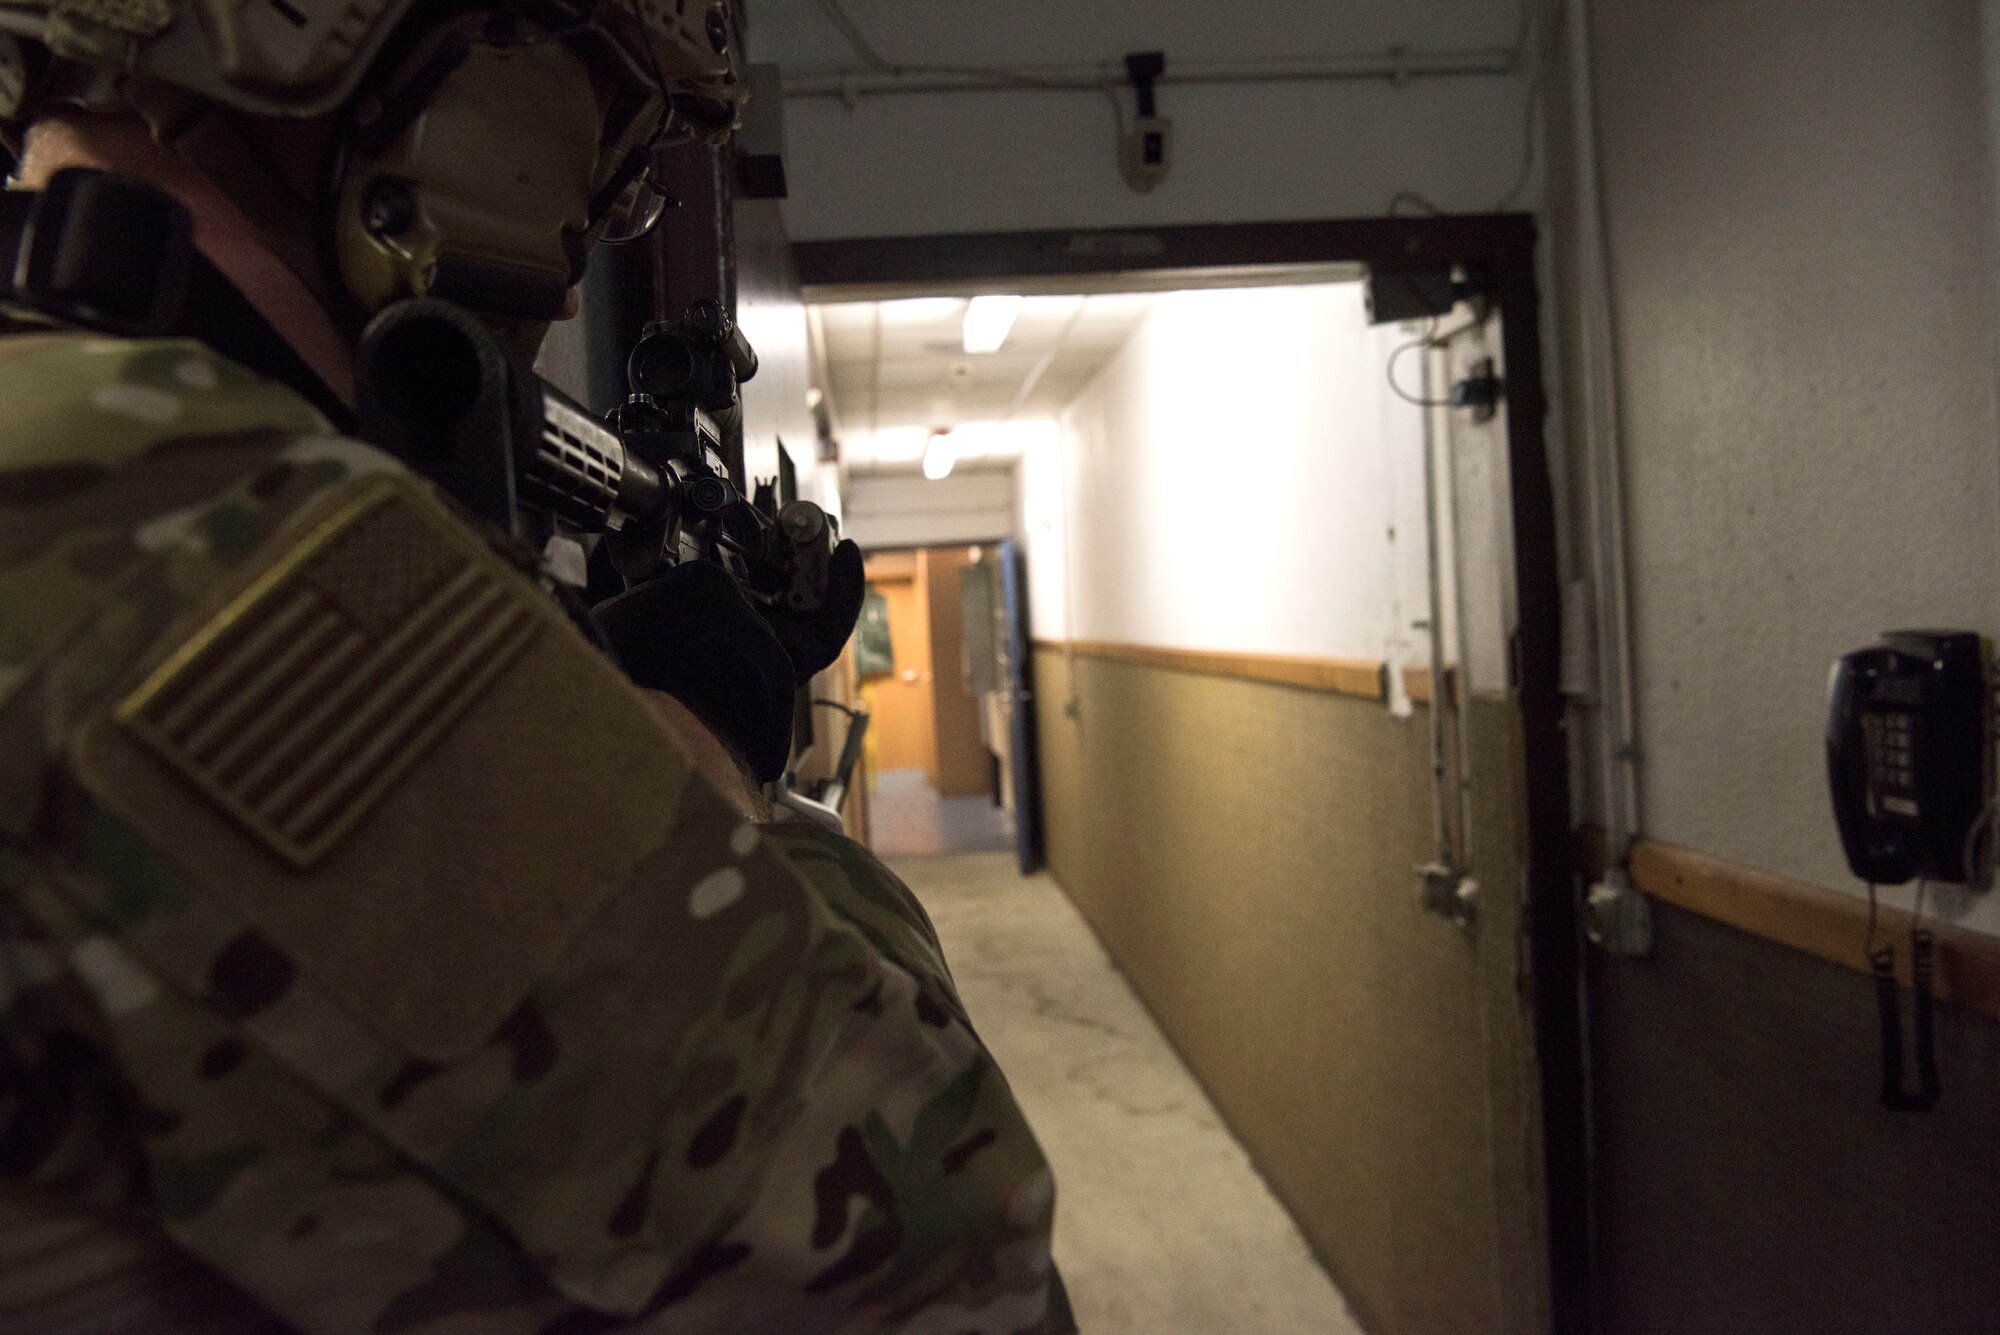 A U.S. Air Force Airman assigned to the 435th Security Forces Squadron aims his M-4 Carbine rifle down a hall during close quarters battle training.